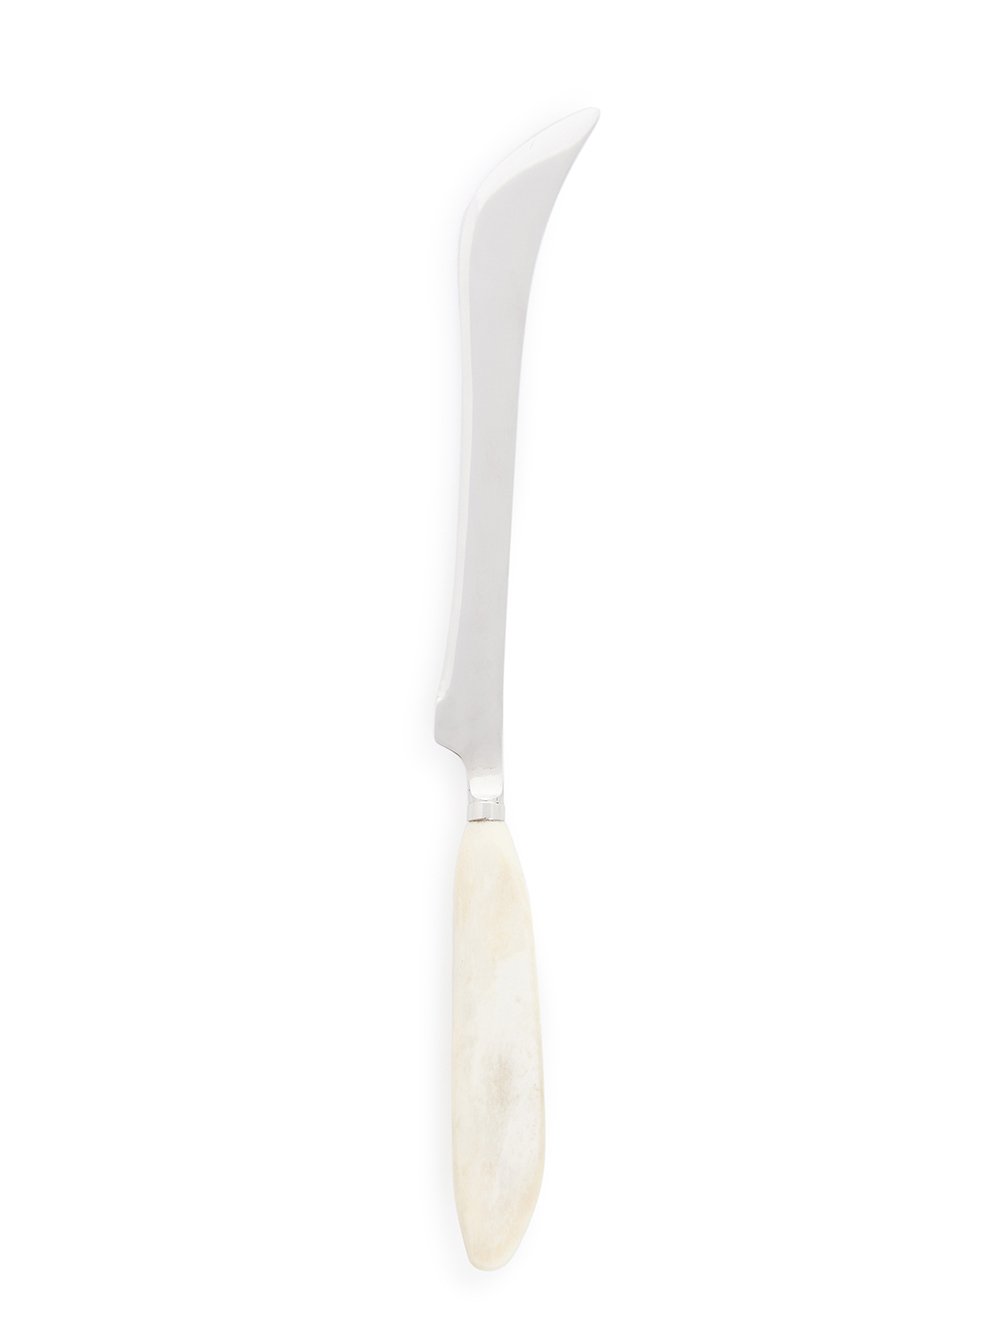 RICK OWENS CARVING KNIFE FEATURES A LONG AND SHARP STERLING TOP AND A SHORT, NATURAL COLOR BONE HANDLE.